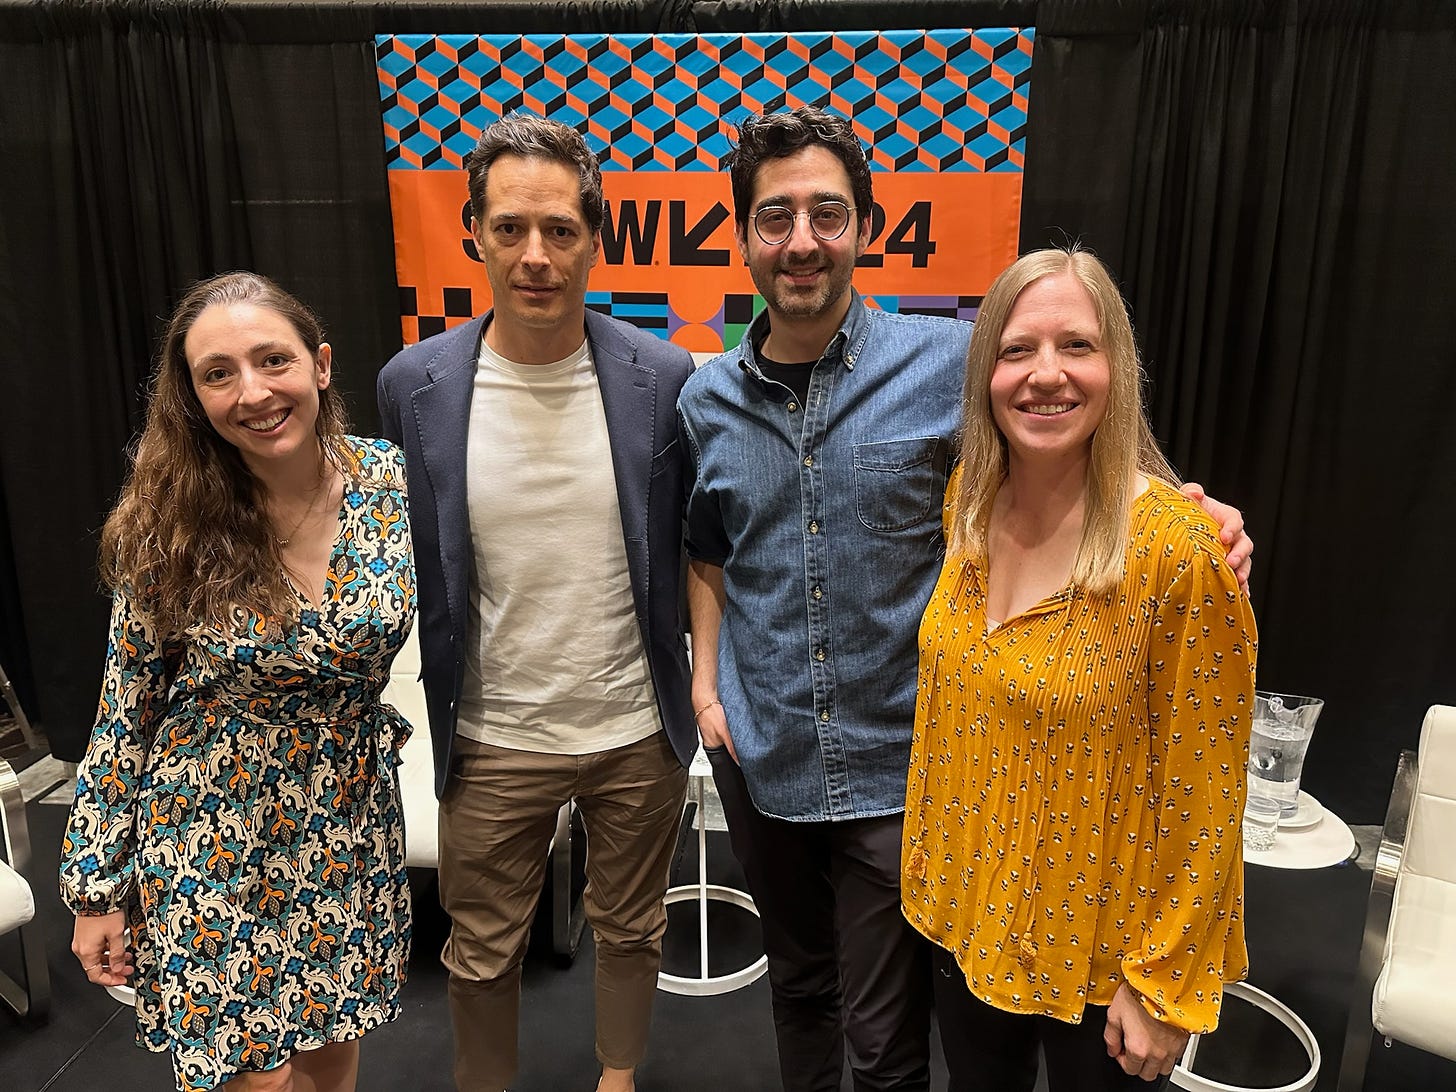 From left: Amanda Morris, Fernando Trueba, Zohar Dayan, and Rachel Kolb stand shoulder-to-shoulder onstage. A black curtain and colorful "SXSW" banner is behind them.